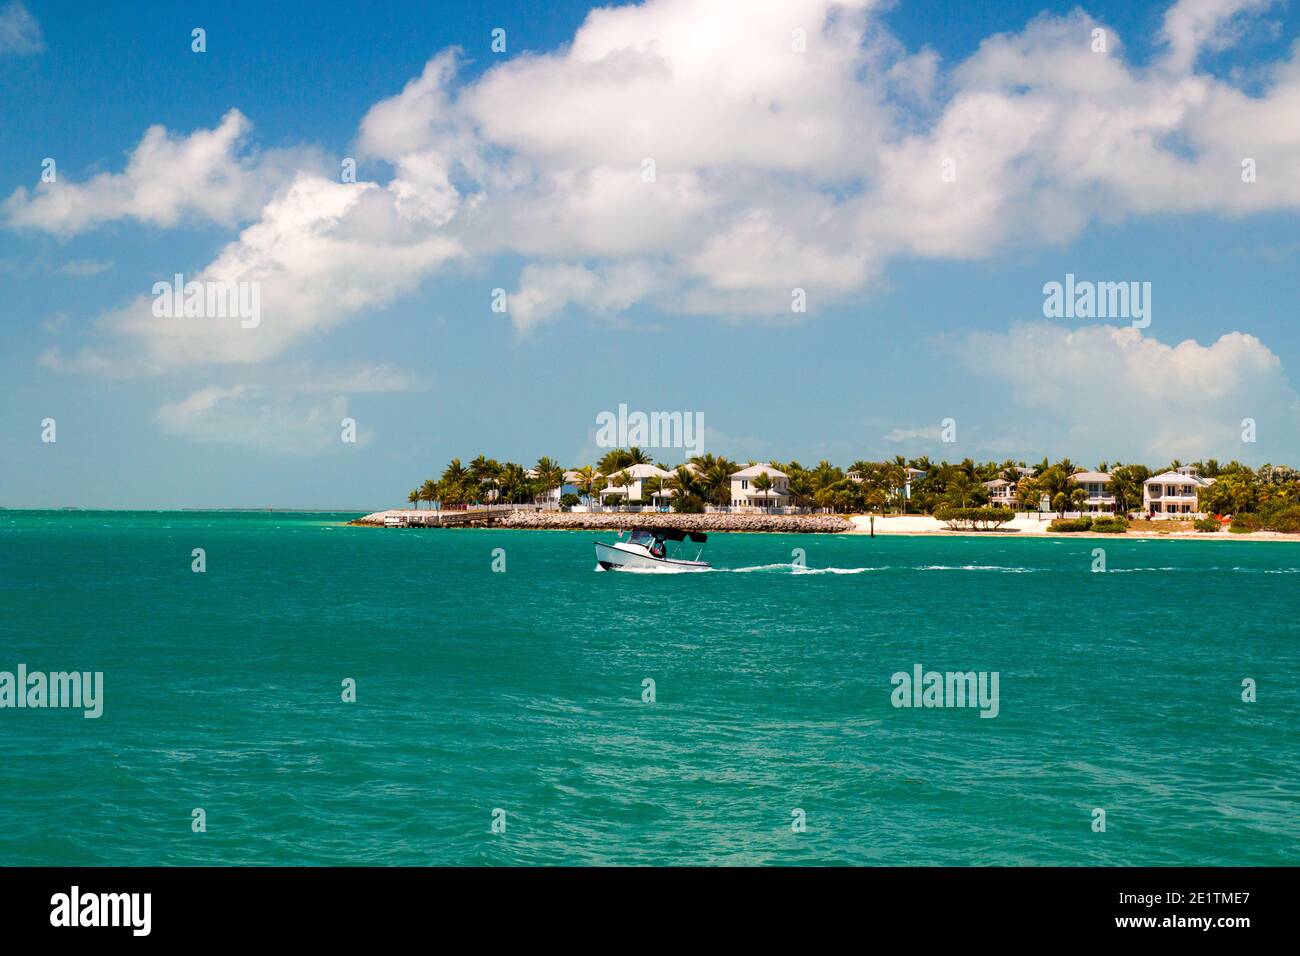 Small motorboat on tropical blue waters of the Sunset Key resort island in the city of Key West Stock Photo